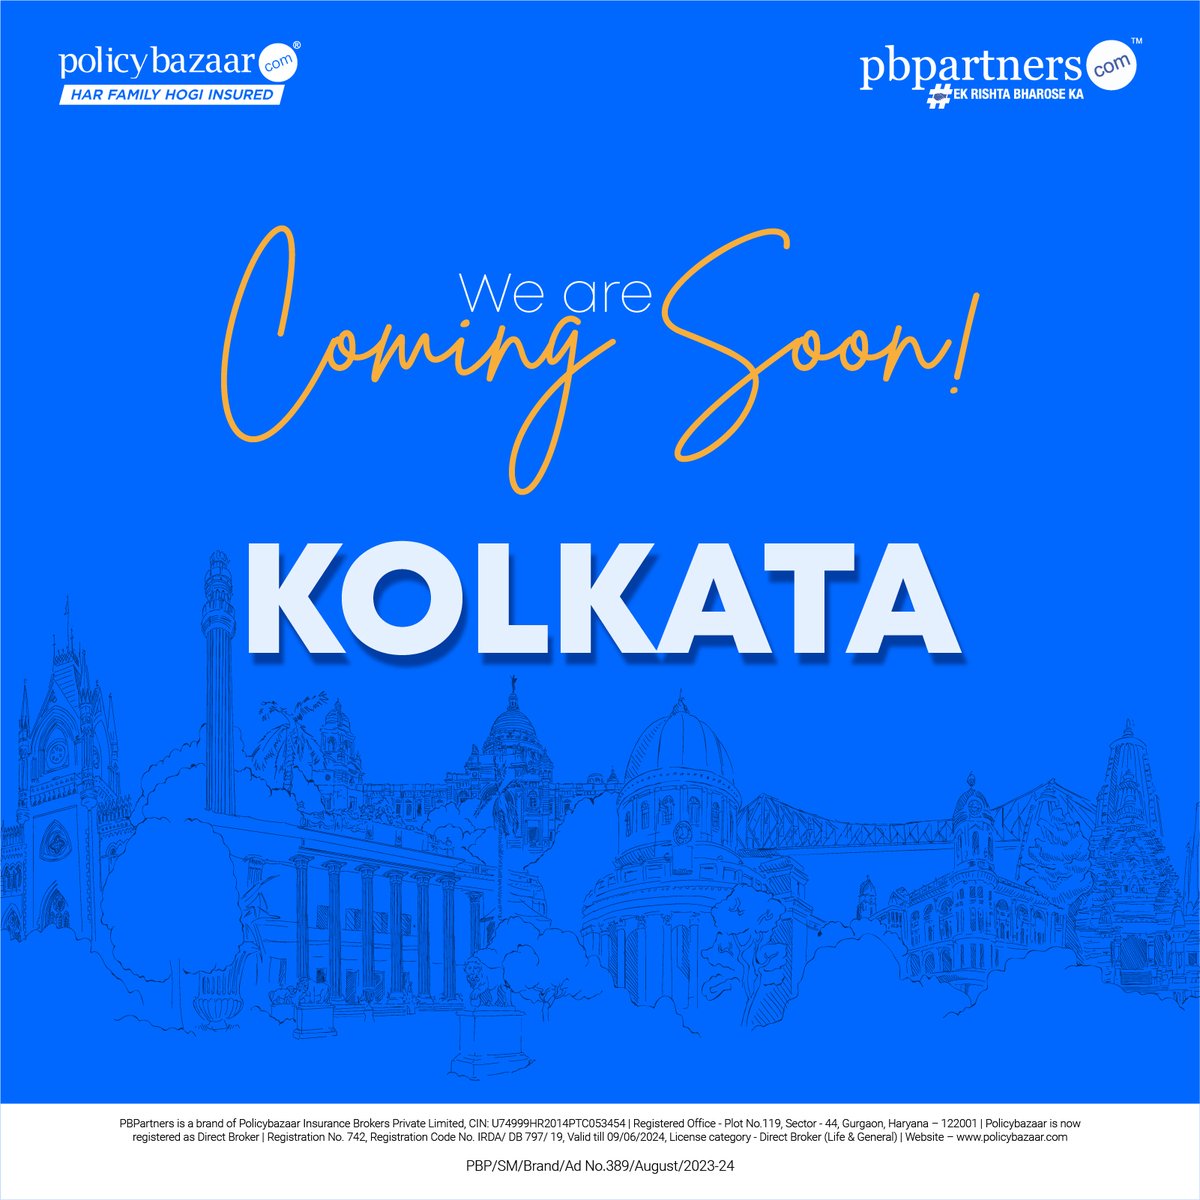 Big Alert 🚨

The Countdown Begins ⏰

Our Brand New Experience Centre in Kolkata is About to Unveil Its Grandeur. Buckle Up for the Spectacular Launch.

Stay Connected for the Latest Updates!

#TakingInsuranceToBharat #experiencecenter #centre #newoffice #Weareexpending #kolkata